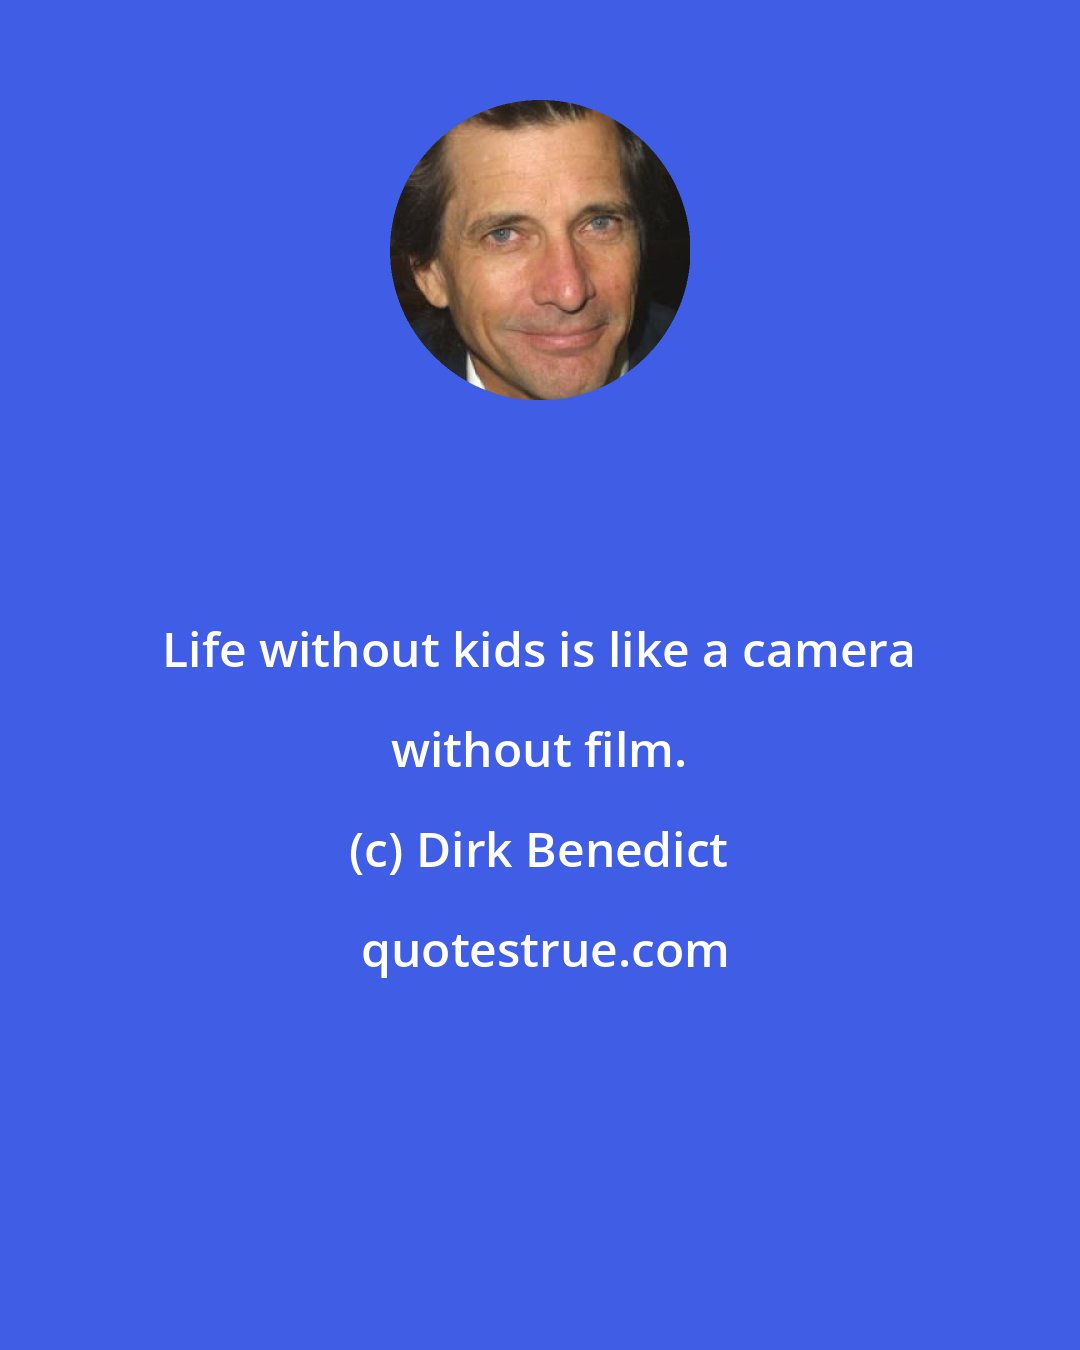 Dirk Benedict: Life without kids is like a camera without film.